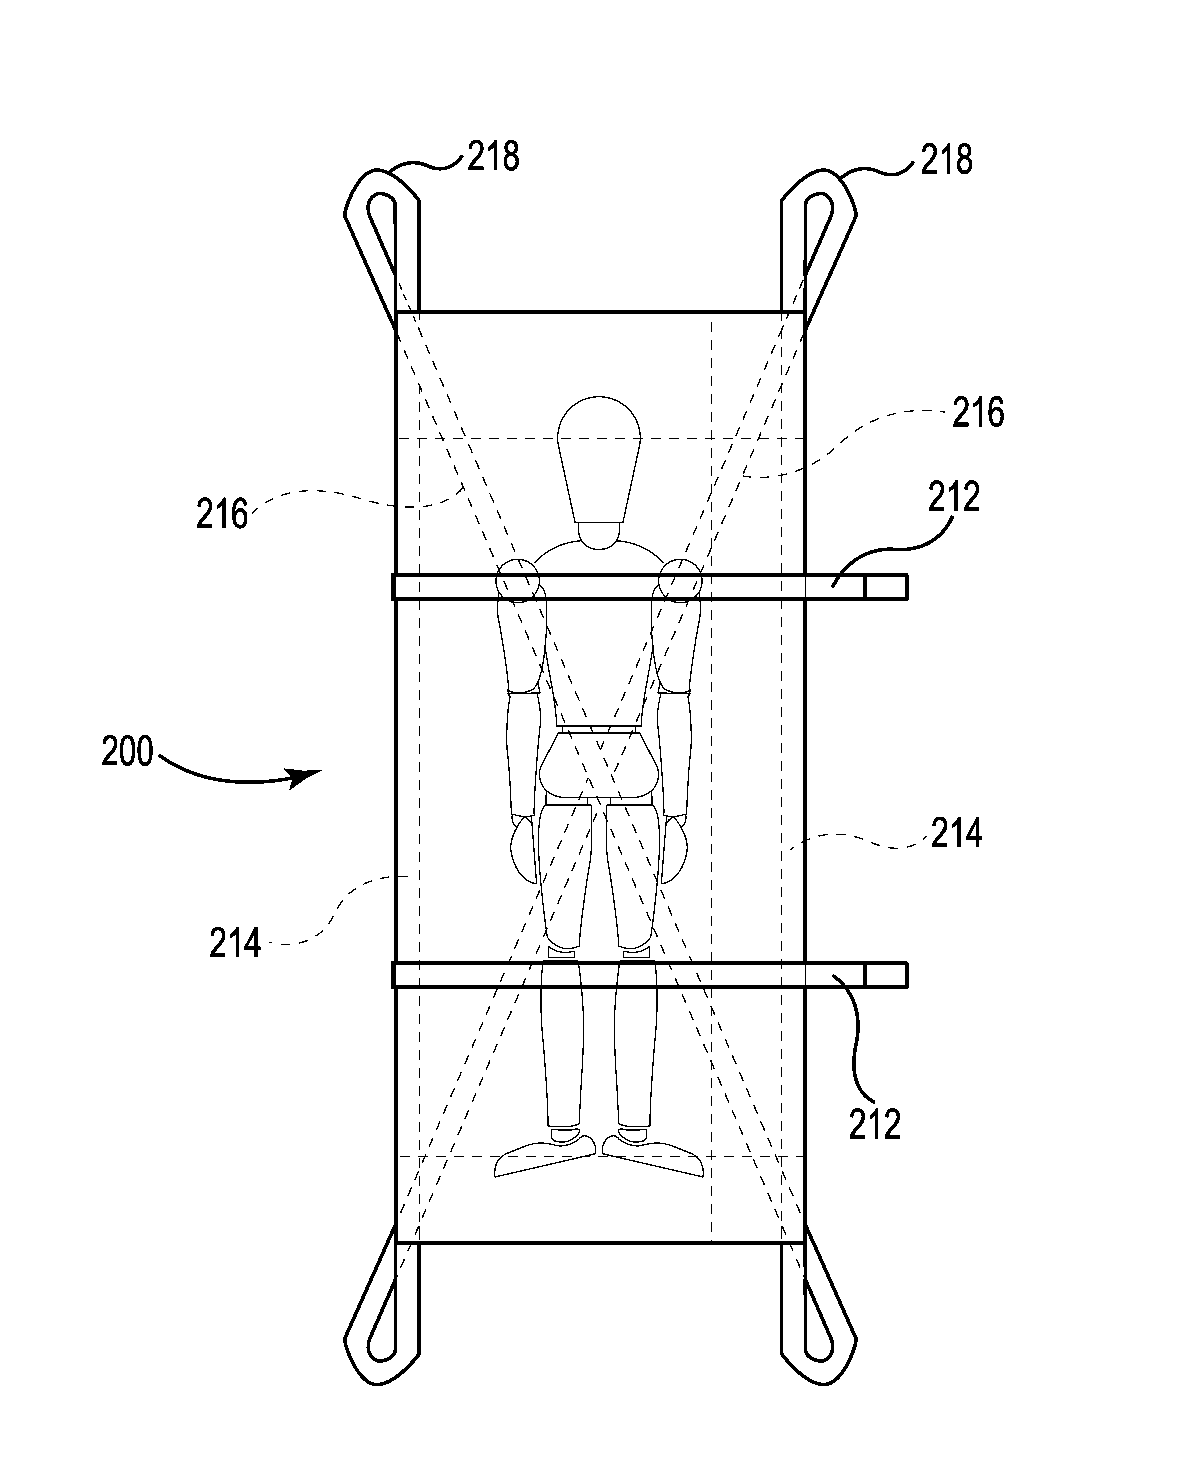 Body containment construction suitable for use within bio-cremation processes